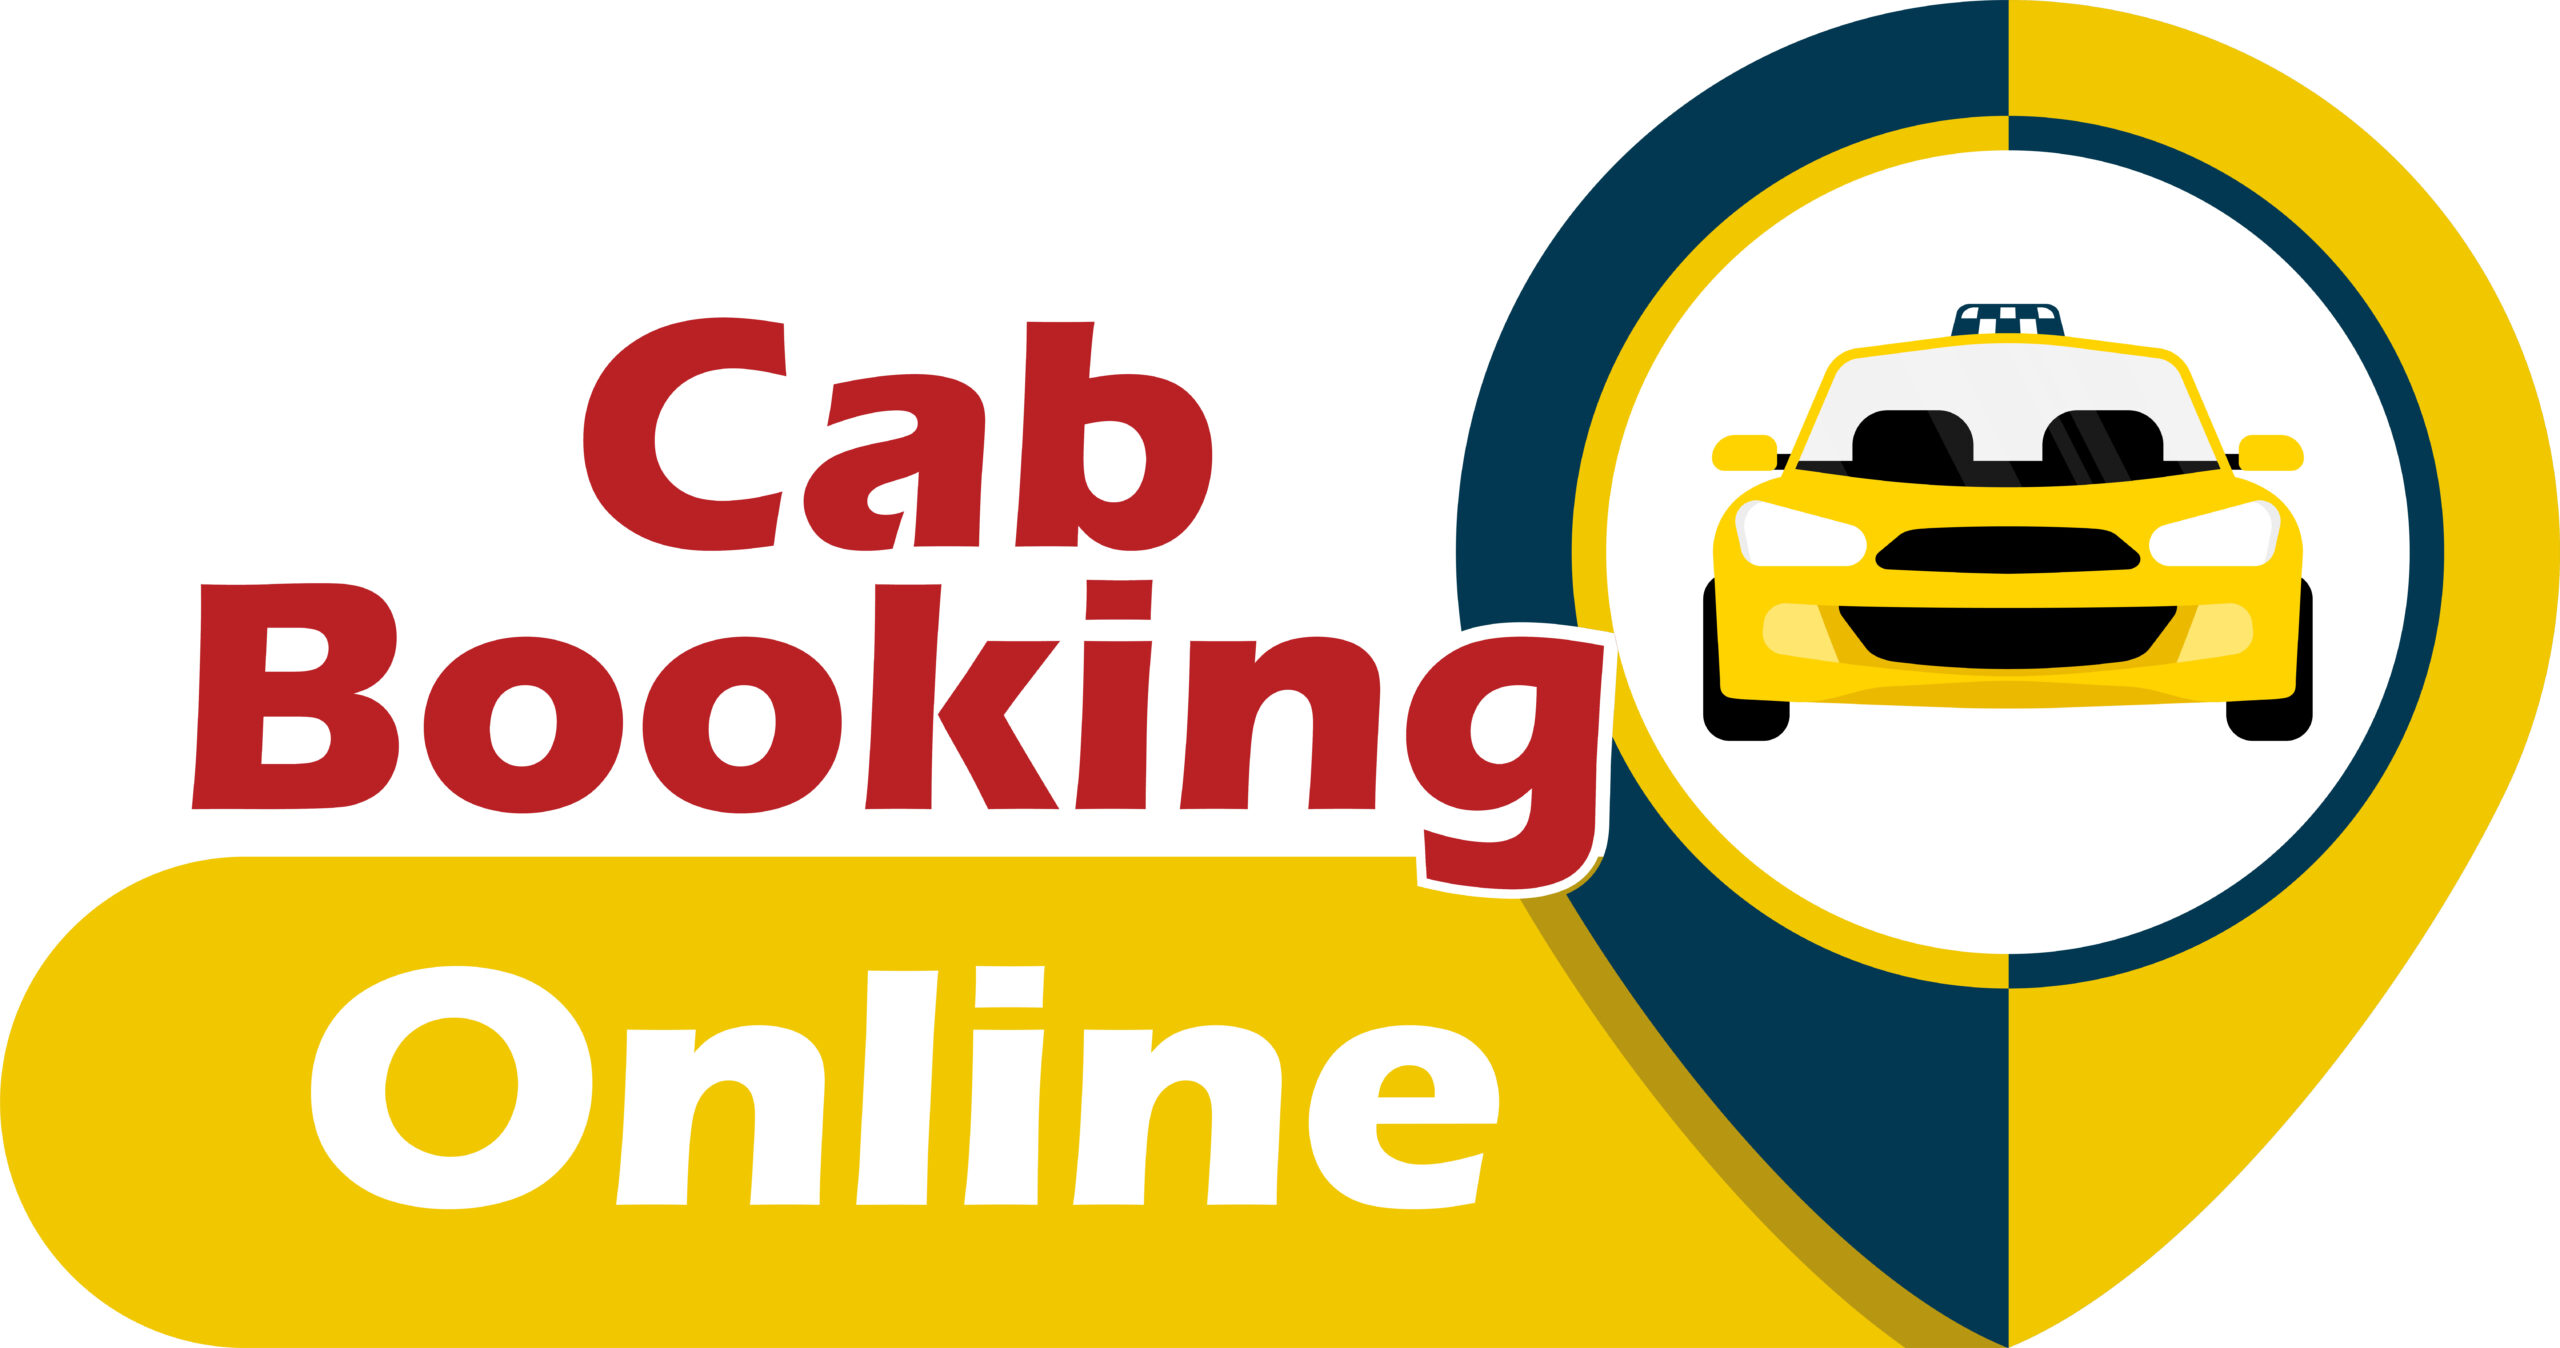 Cab Booking Online FINAL LOGO JPG scaled